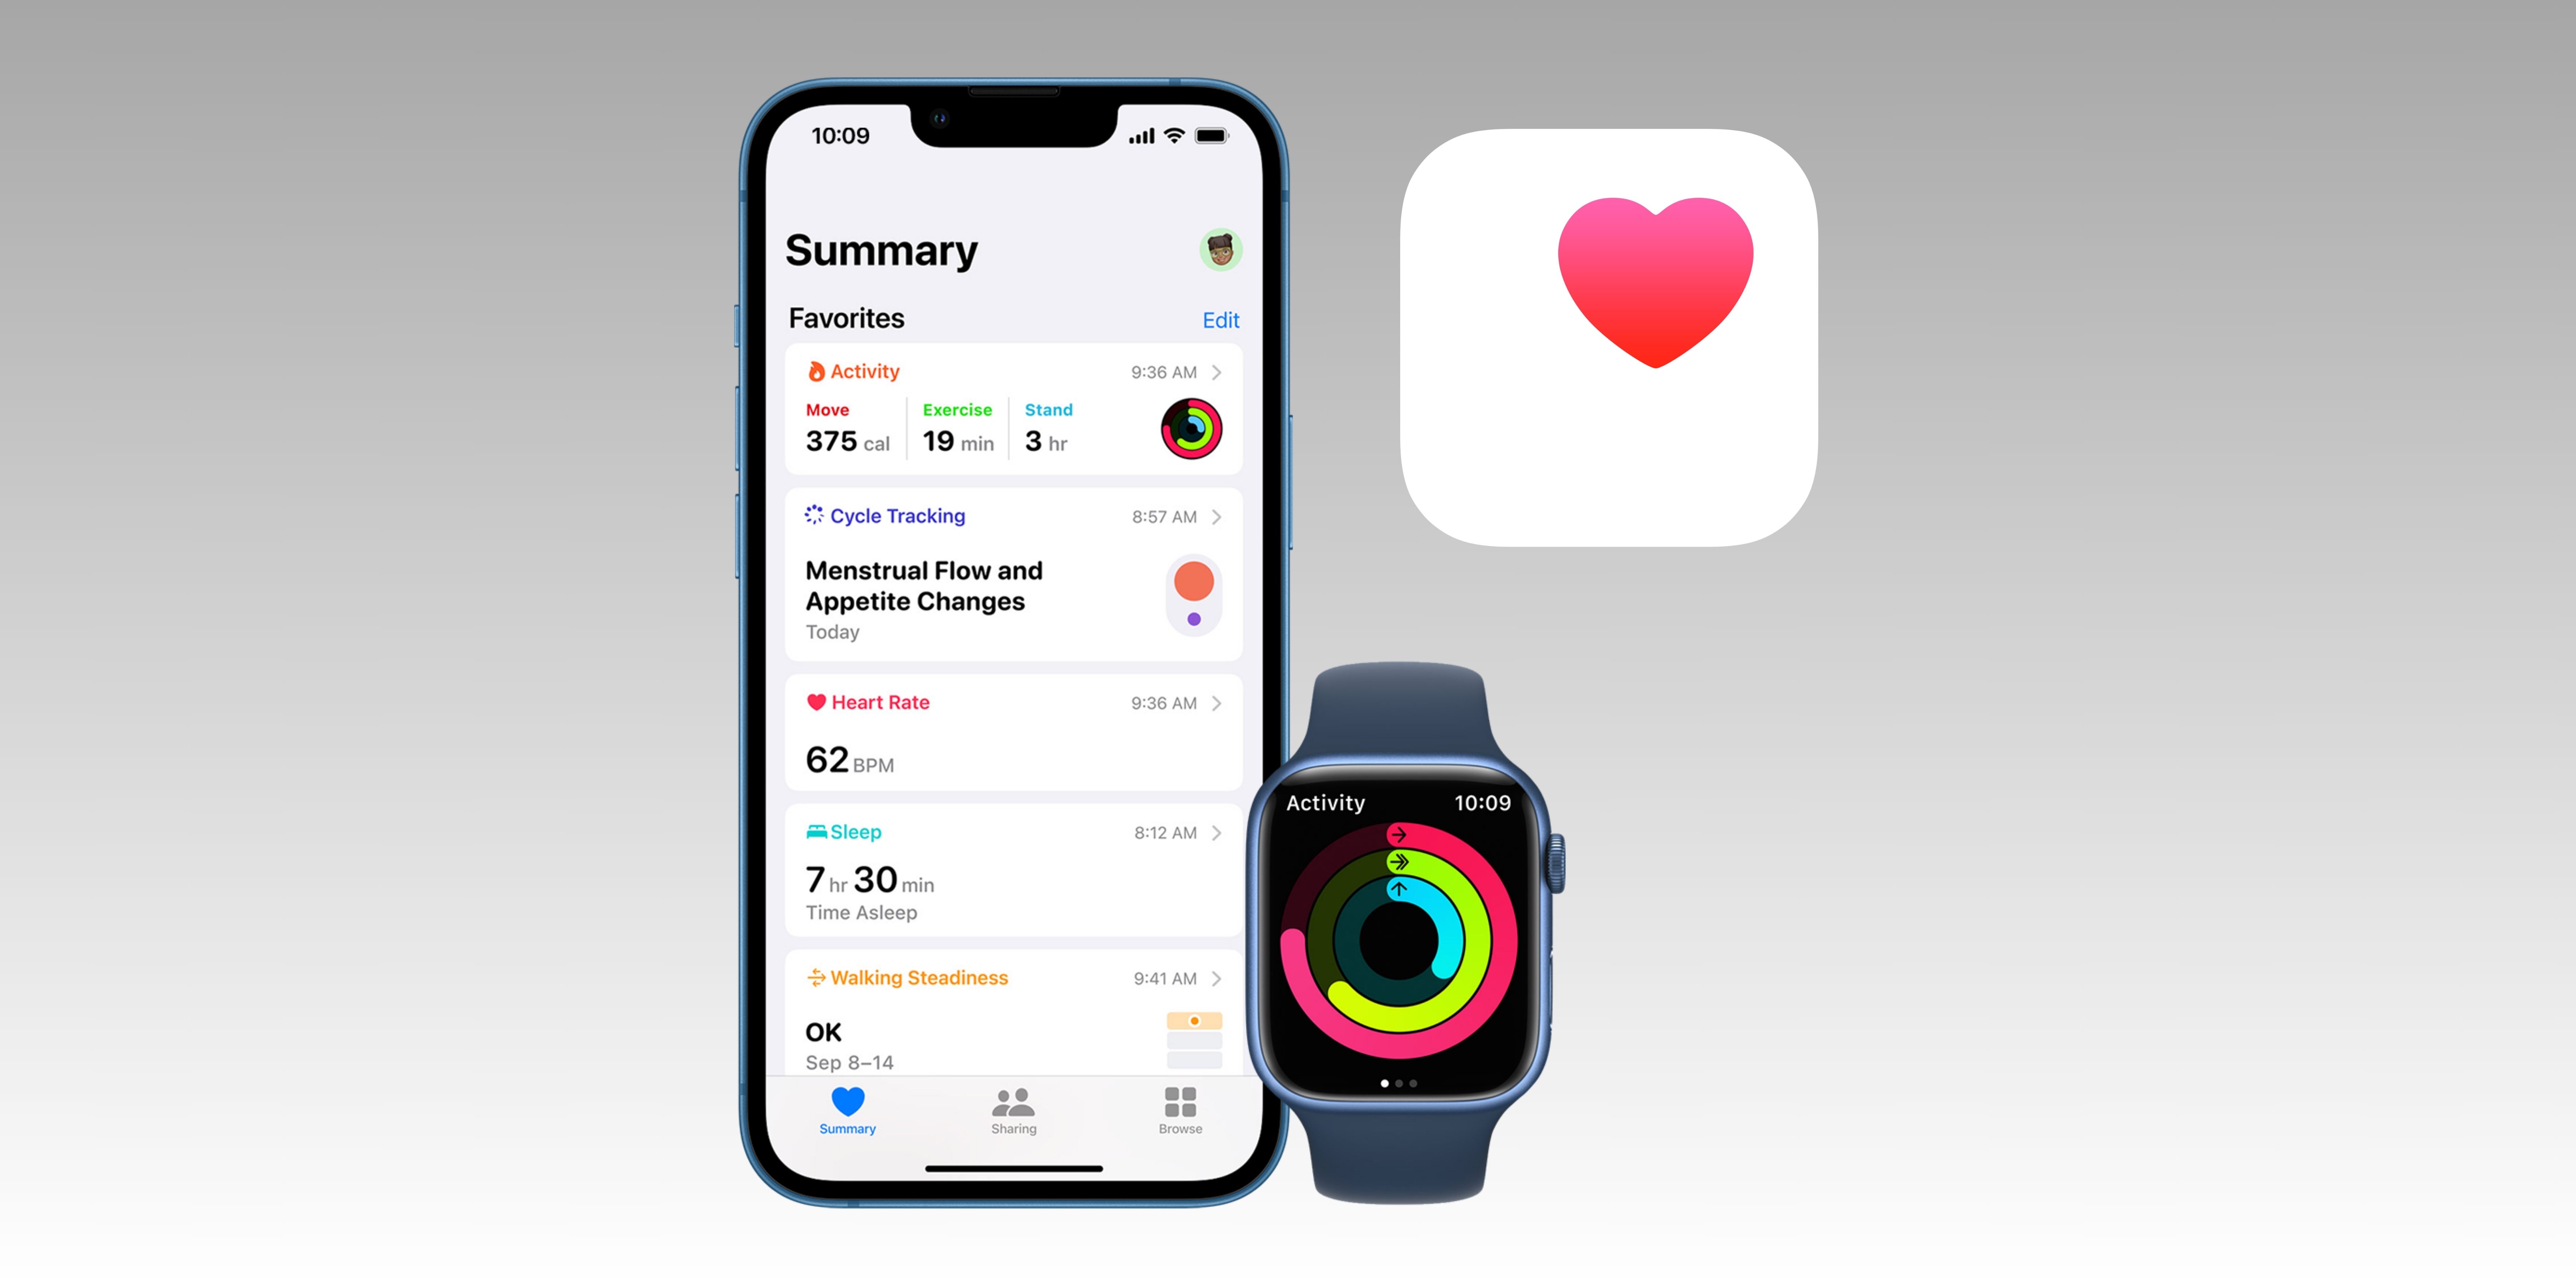 Siri on your Apple Watch, iPhone and iPad can now access Health data for you